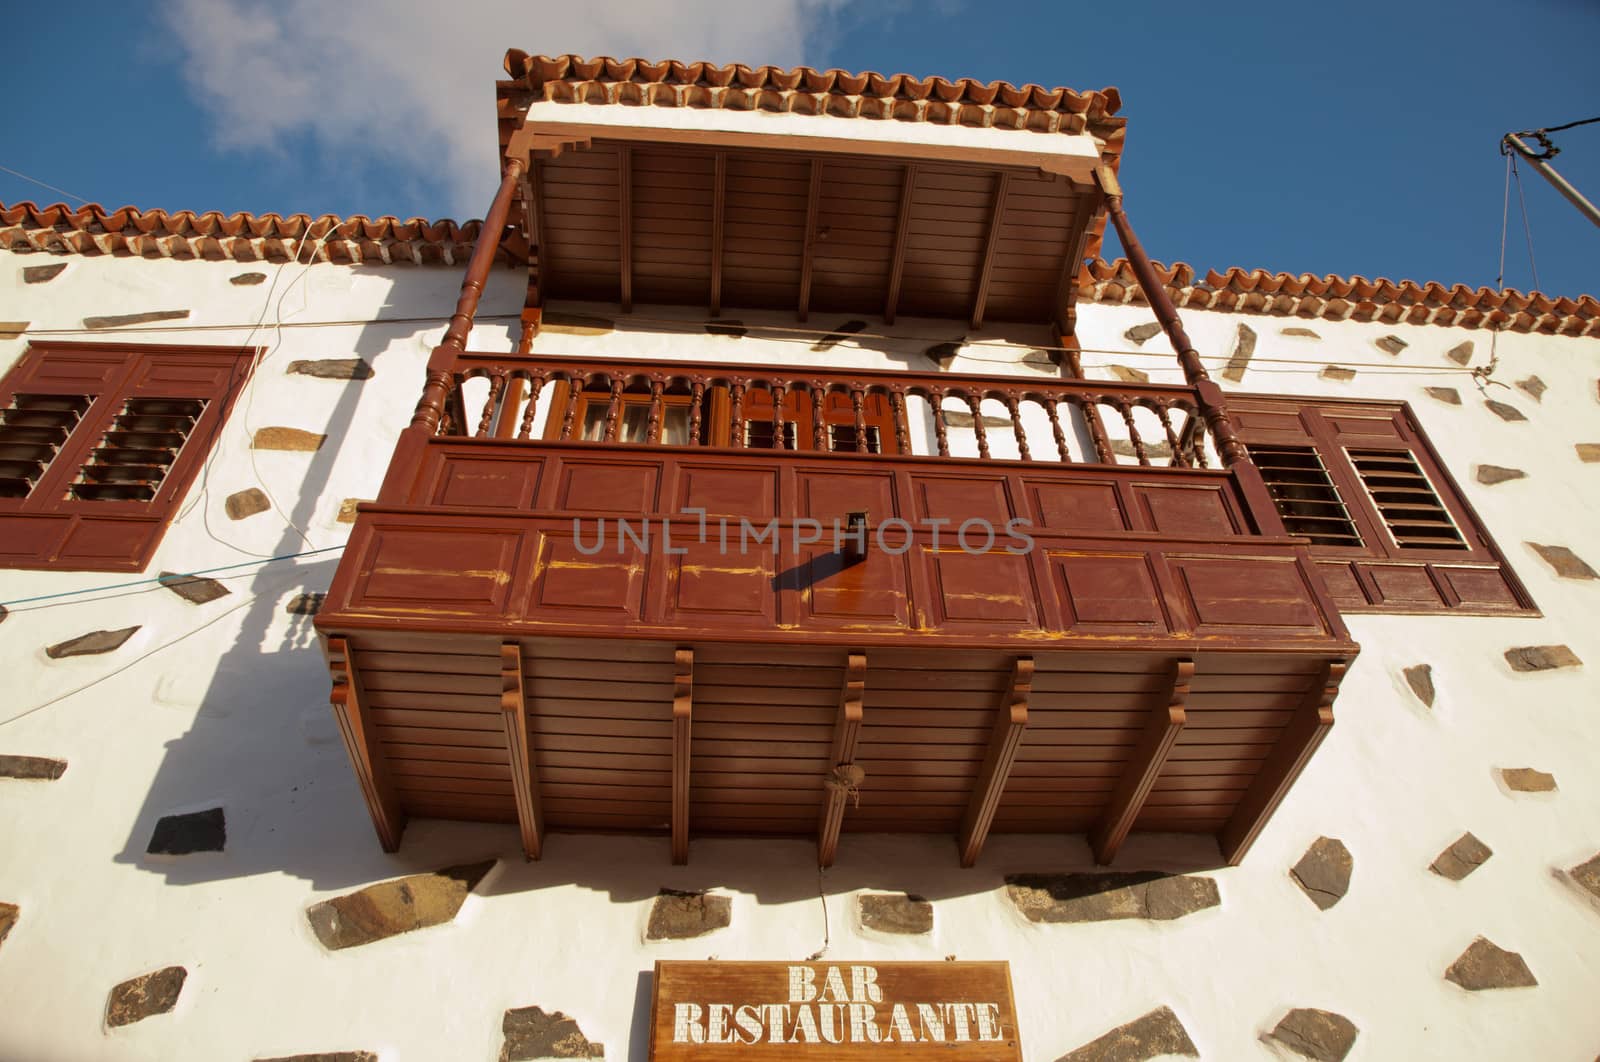 Detail of architecture in Tenerife by watchtheworld